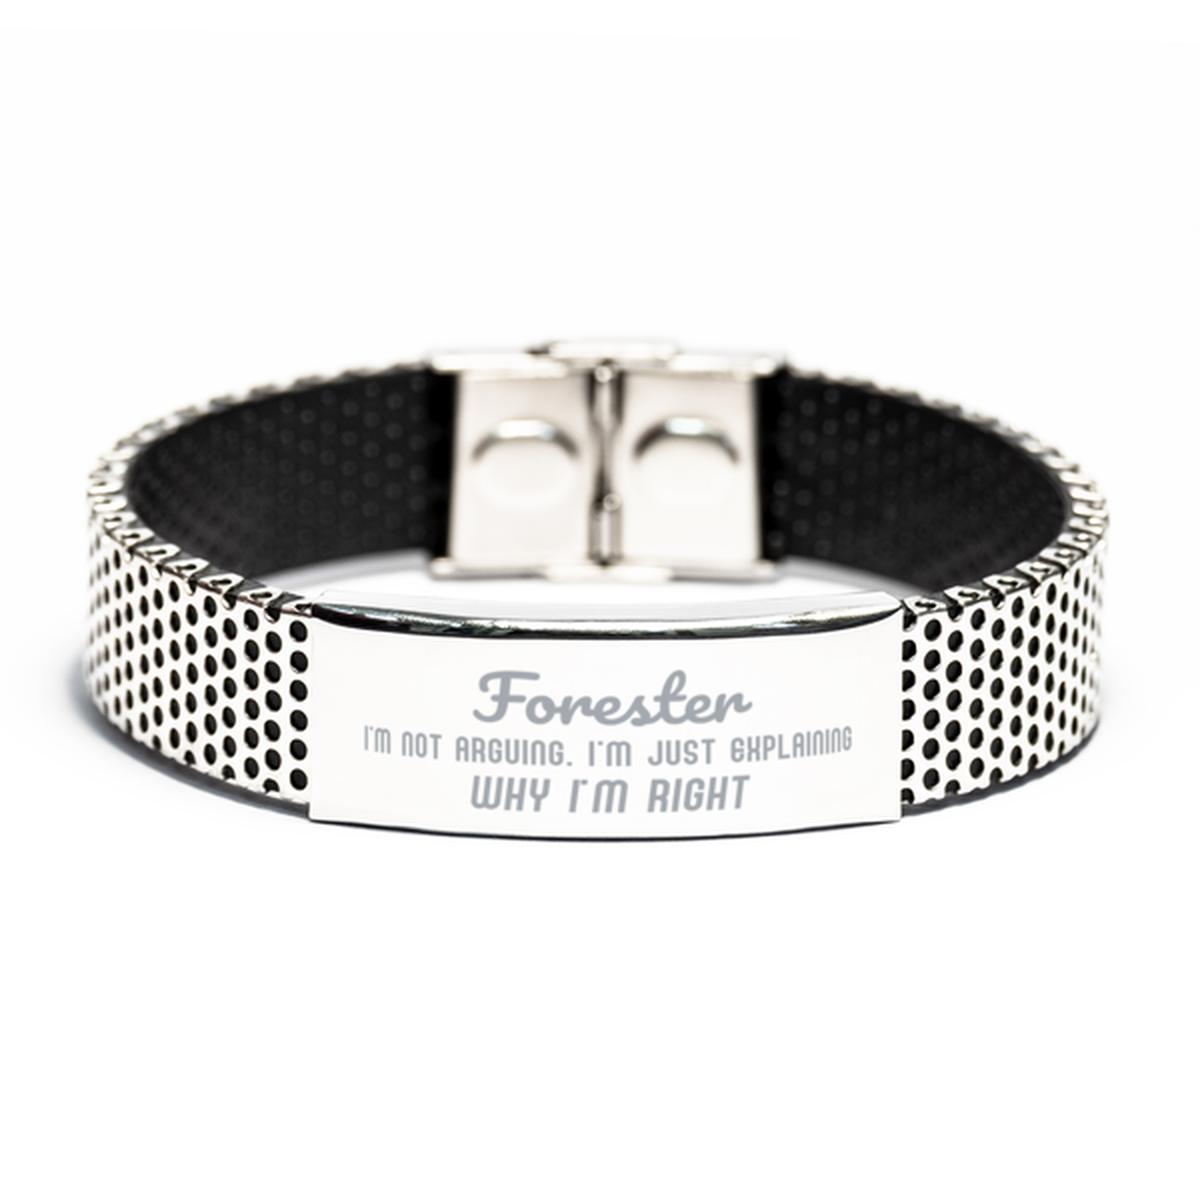 Forester I'm not Arguing. I'm Just Explaining Why I'm RIGHT Stainless Steel Bracelet, Funny Saying Quote Forester Gifts For Forester Graduation Birthday Christmas Gifts for Men Women Coworker